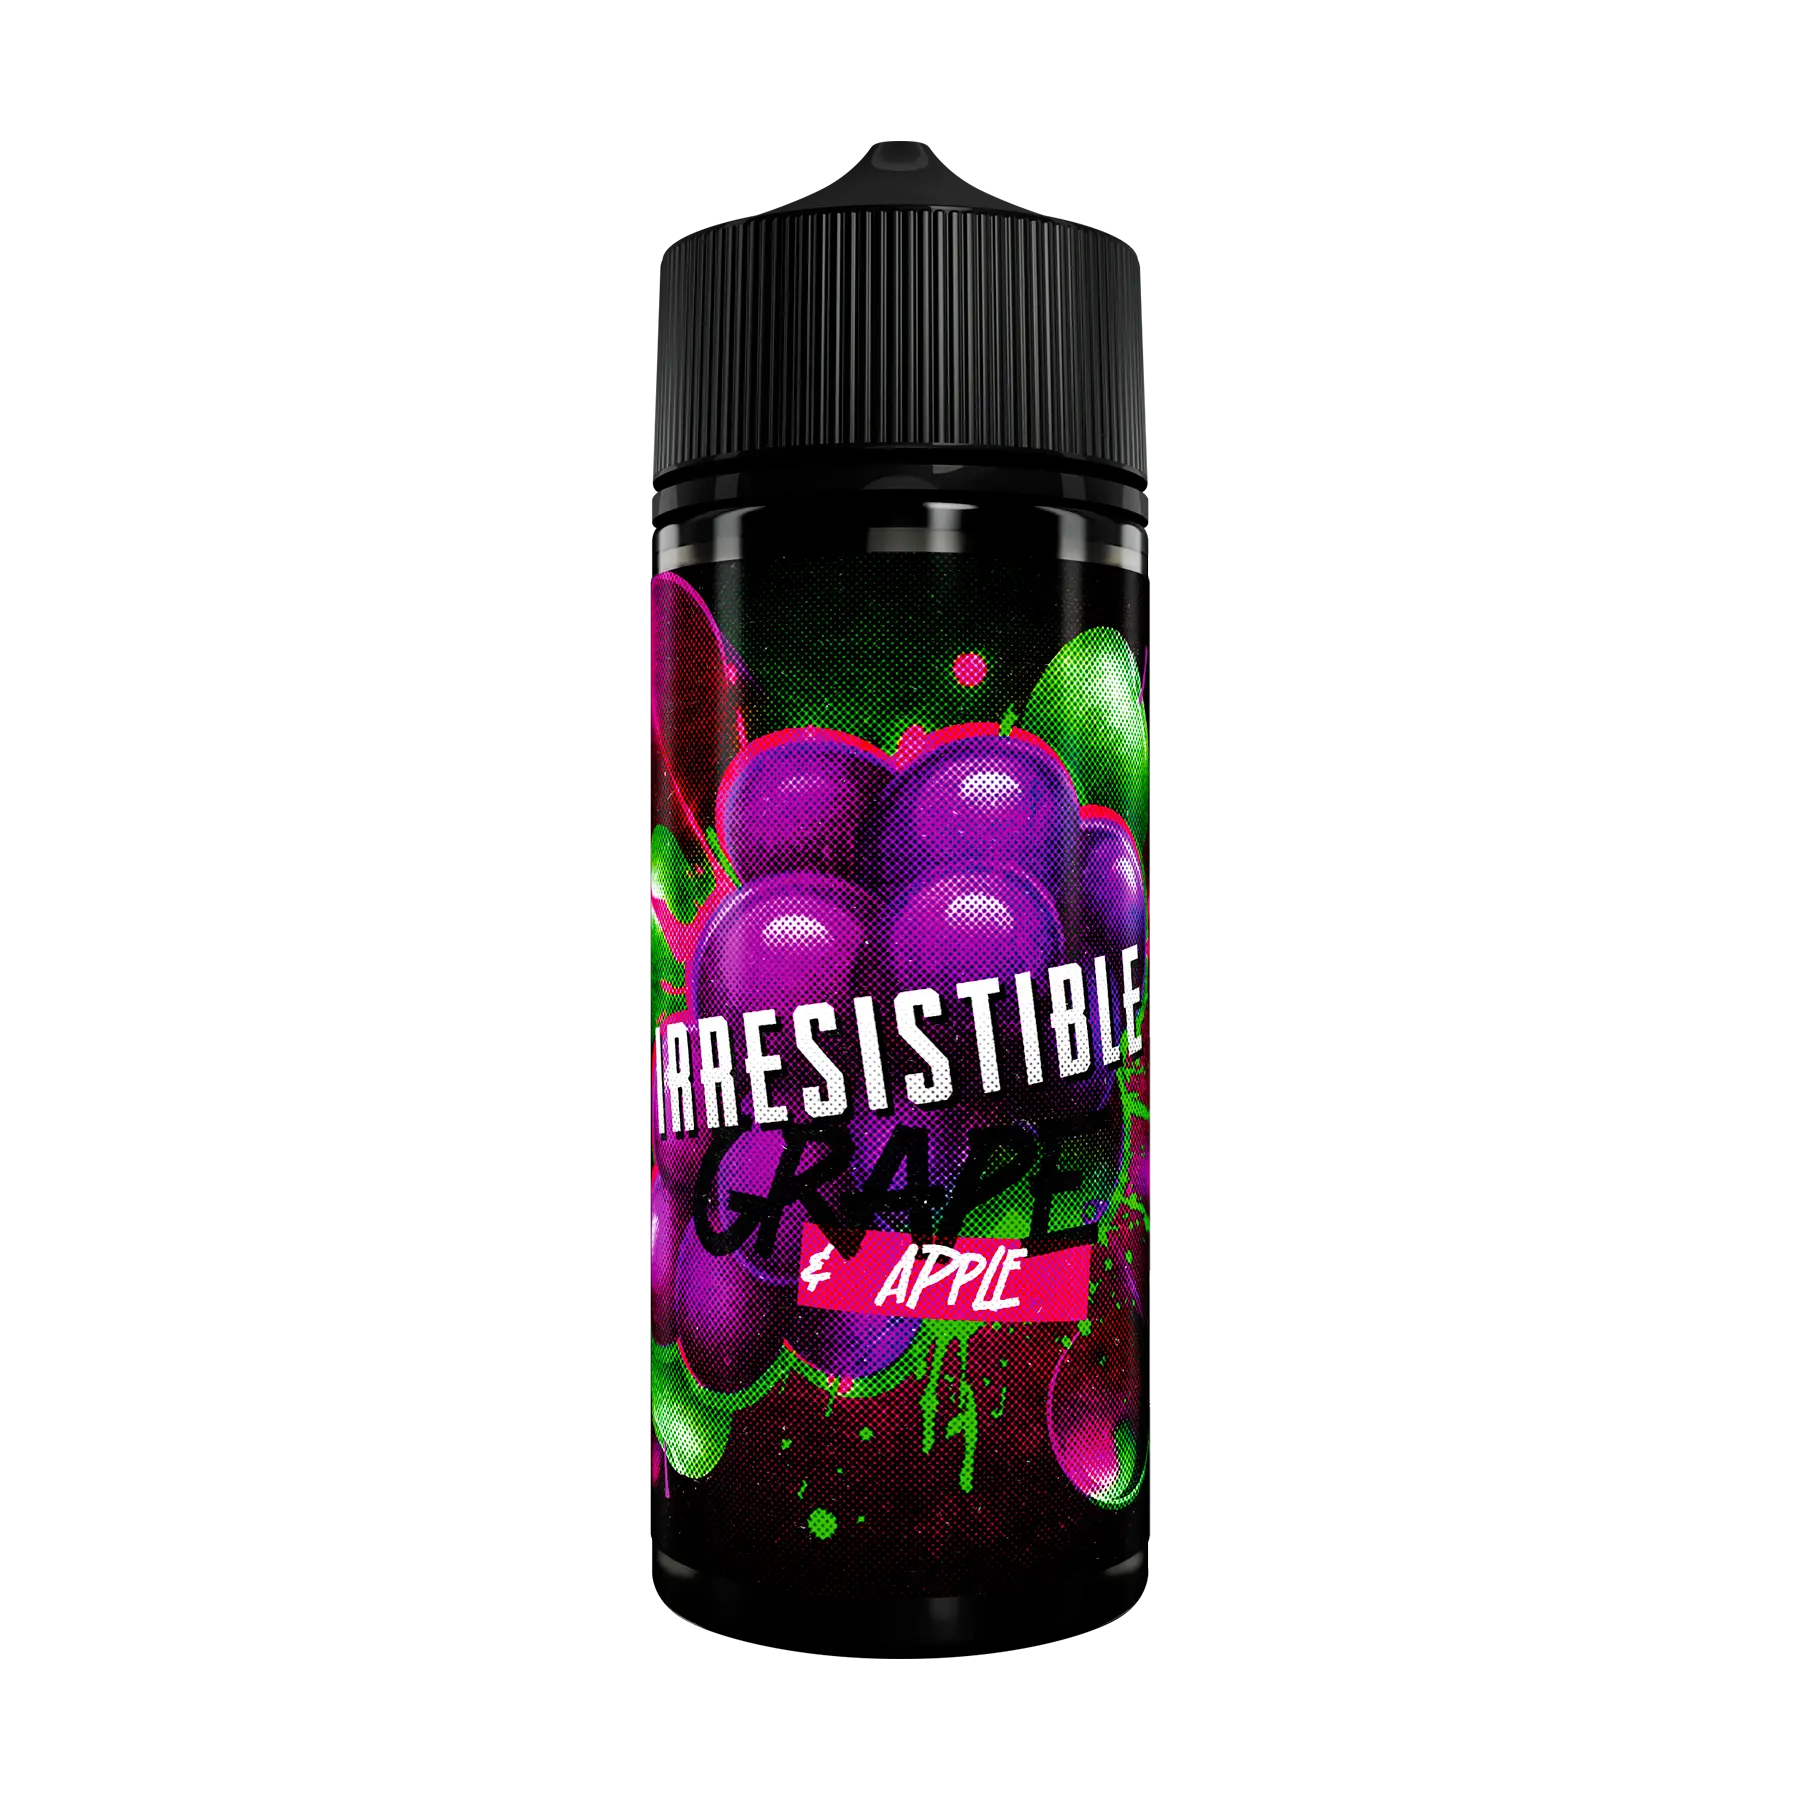 Irresistible Grape Apple is a blend of crisp tart apples & sweet juicy grapes. The apples are balanced perfectly by the grapes, creating a satisfying vape.